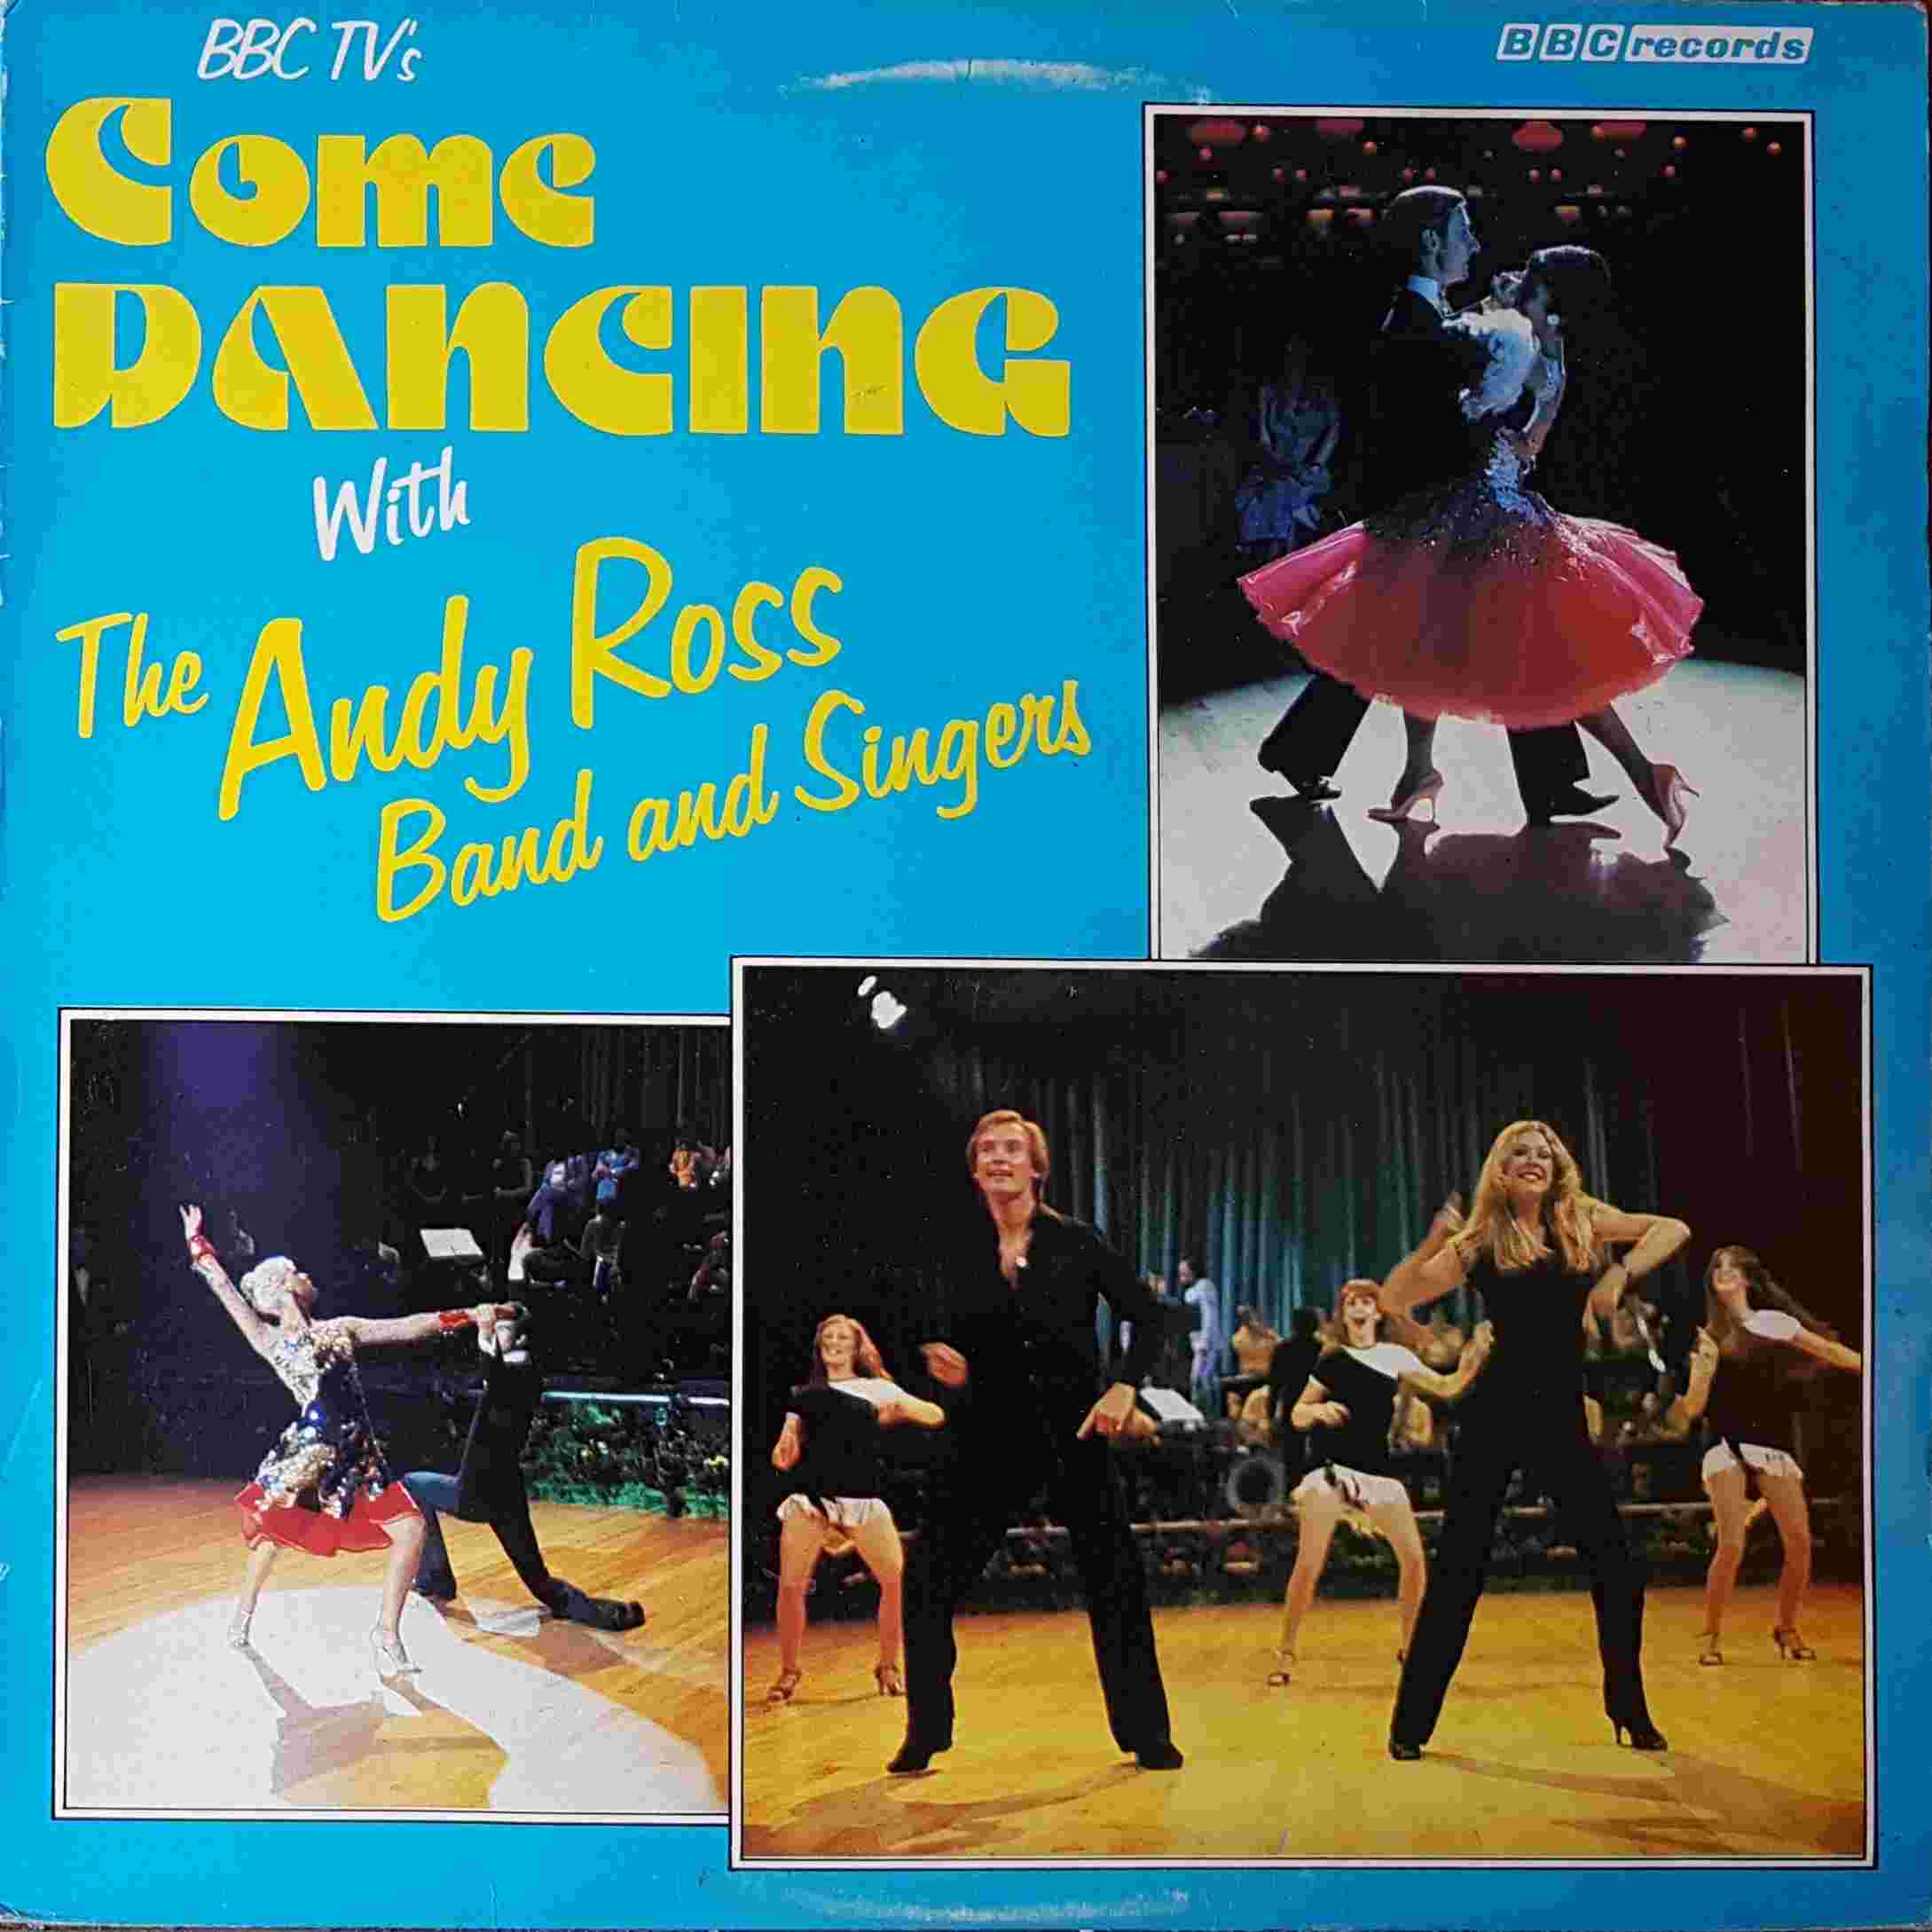 Picture of REH 388 Come dancing by artist Various from the BBC albums - Records and Tapes library